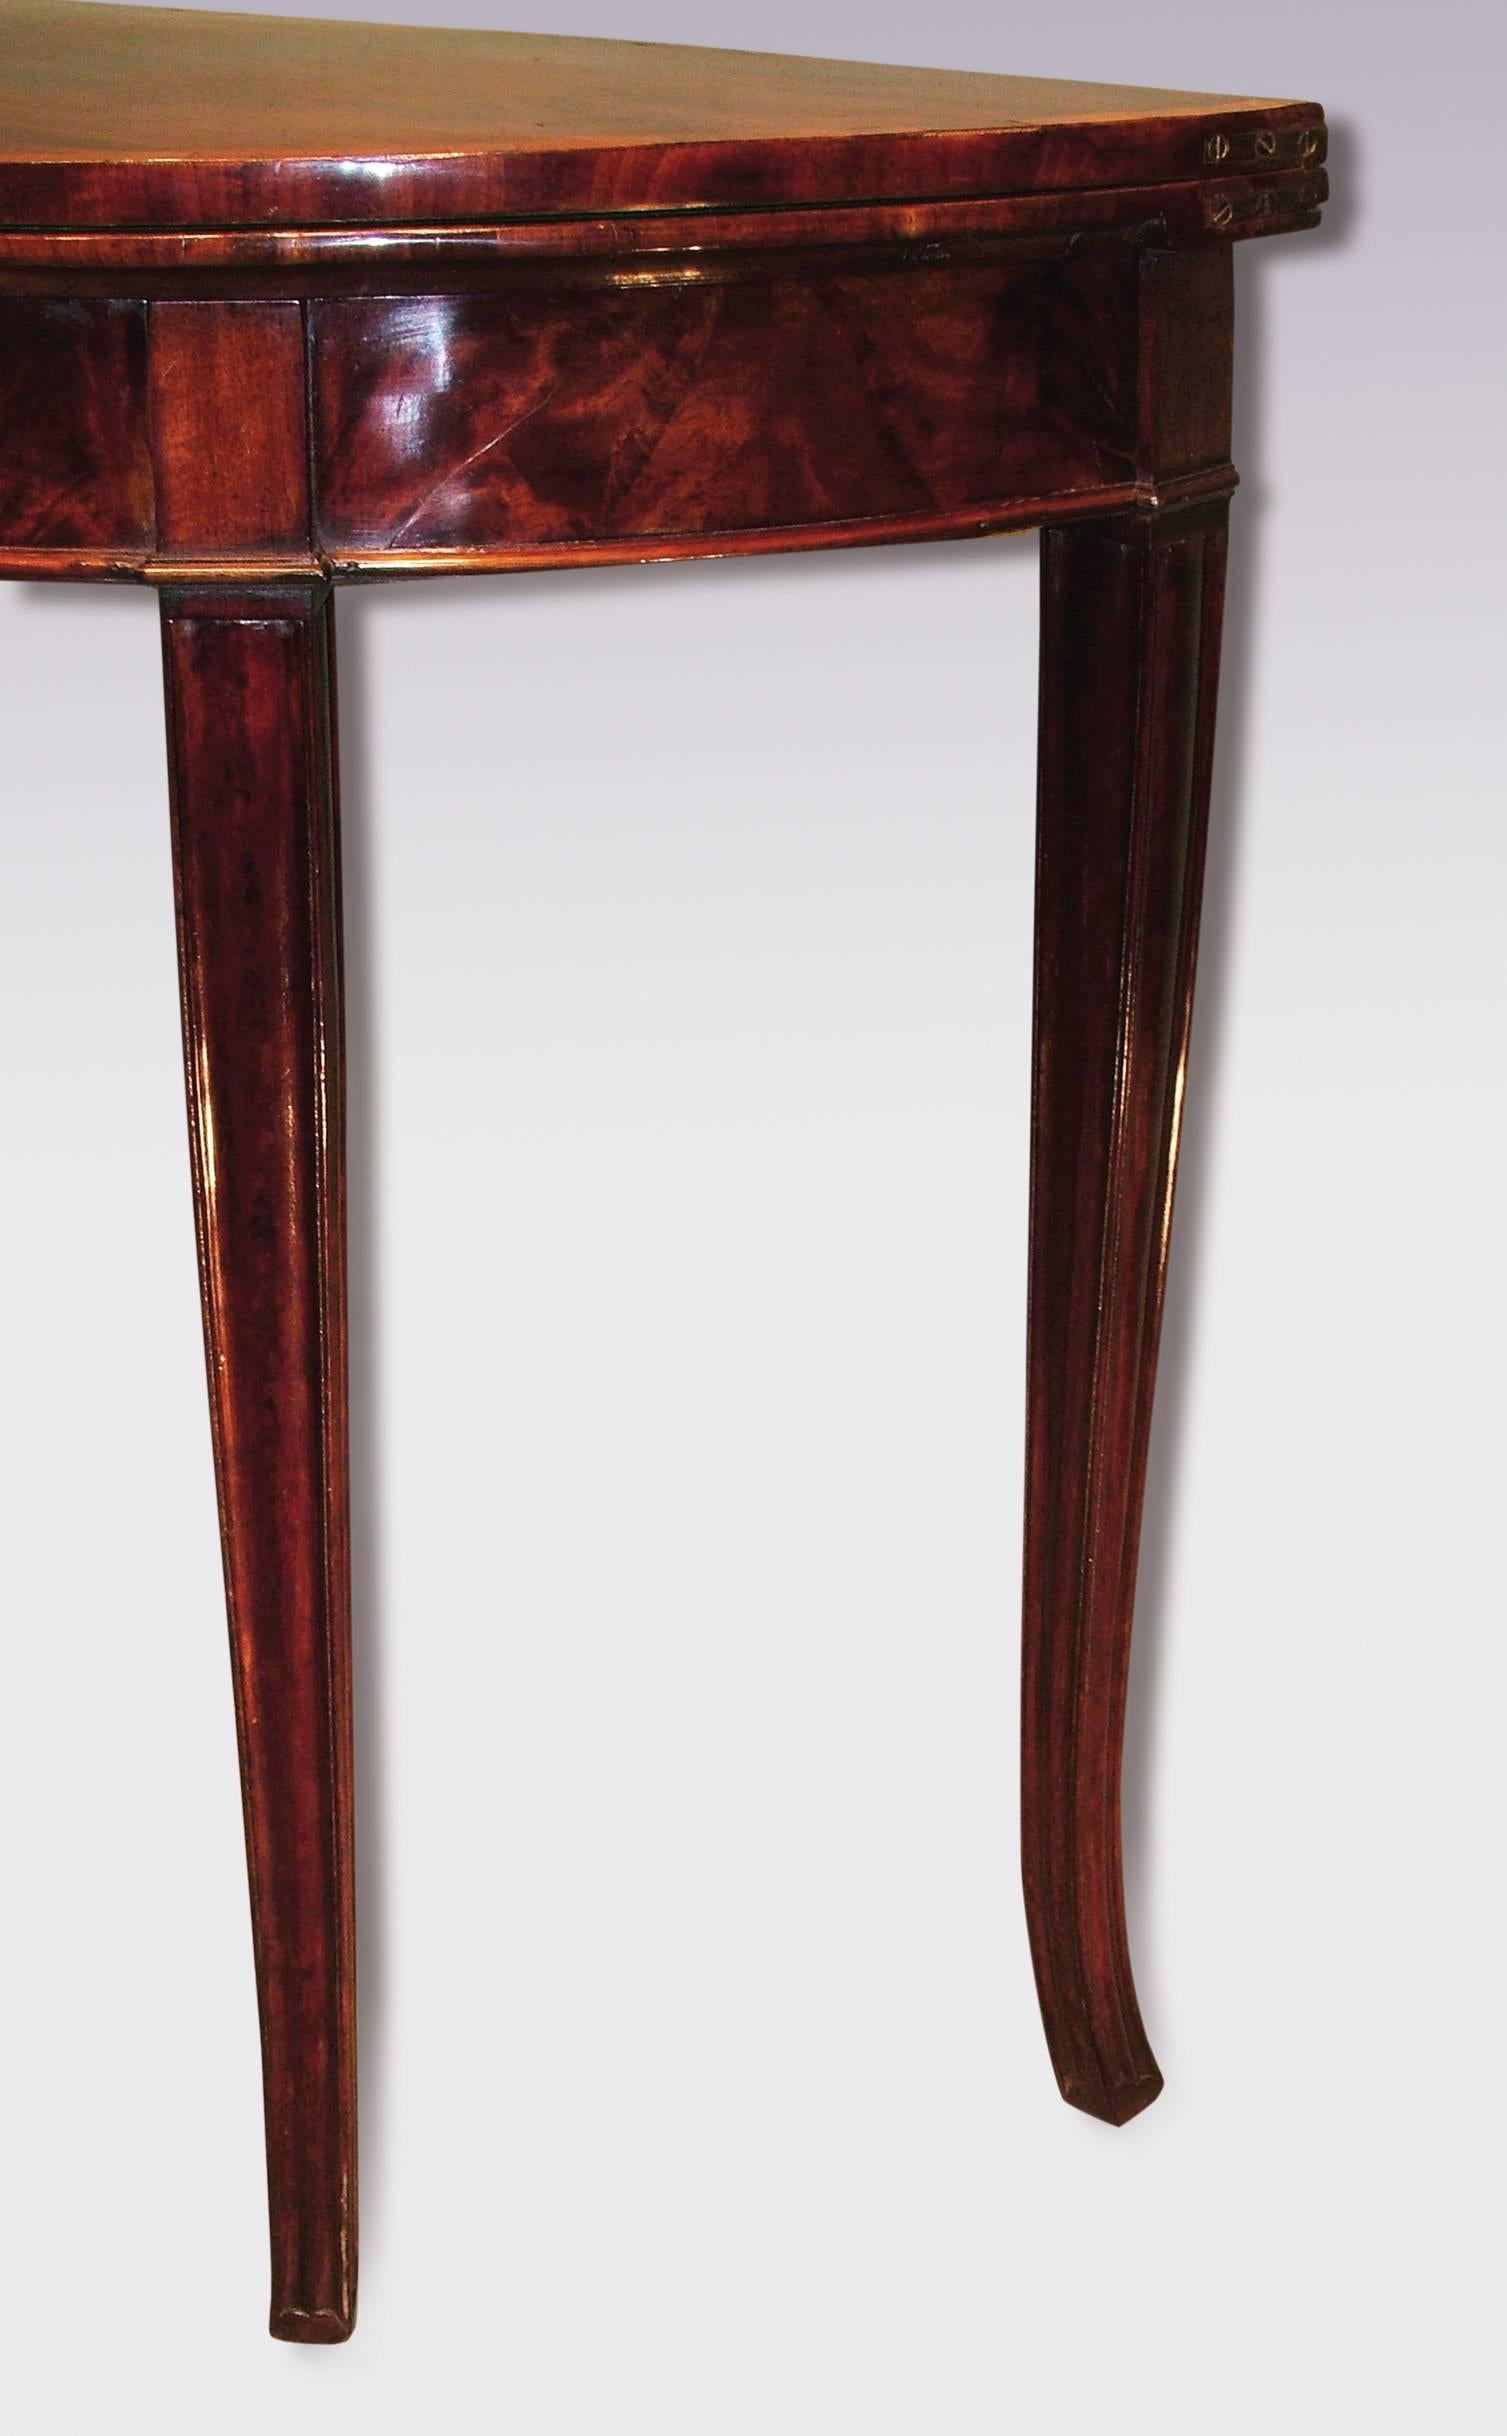 A late 18th century Sheraton period figured mahogany half round card table, of attractive small proportions, having tulipwood crossbanded top above flame figured frieze, supported on fluted outswept tapering legs.